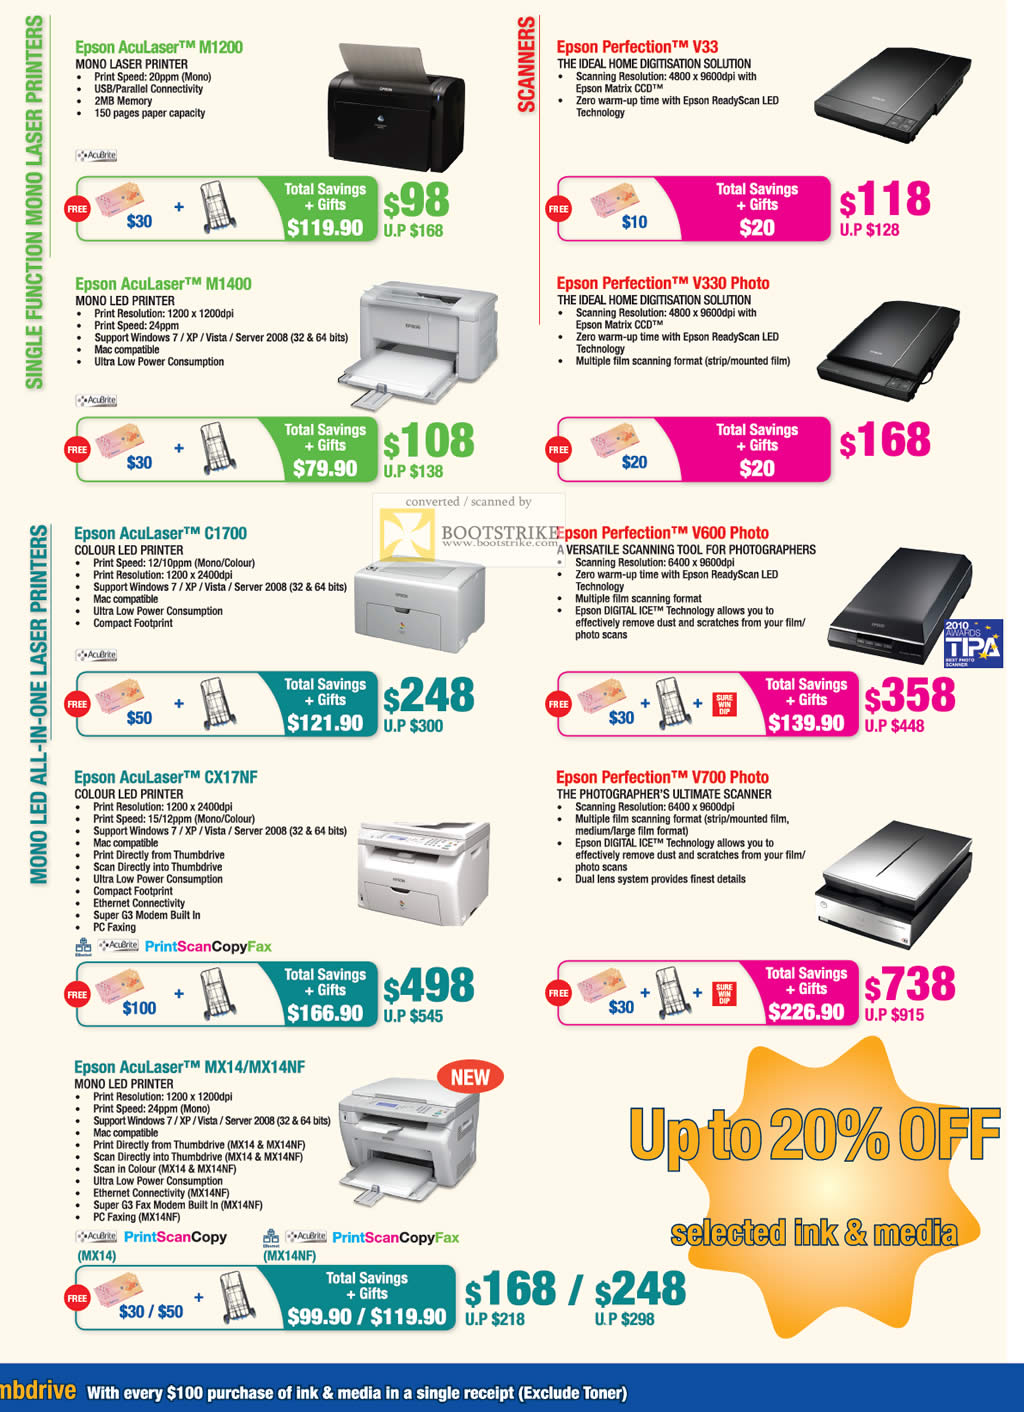 SITEX 2011 price list image brochure of Epson Printers Laser AcuLaser M1200, M1400, C1700, MX14, CX17NF, MX14NF, Scanners Perfection V33, Perfection V330 Photo, V600